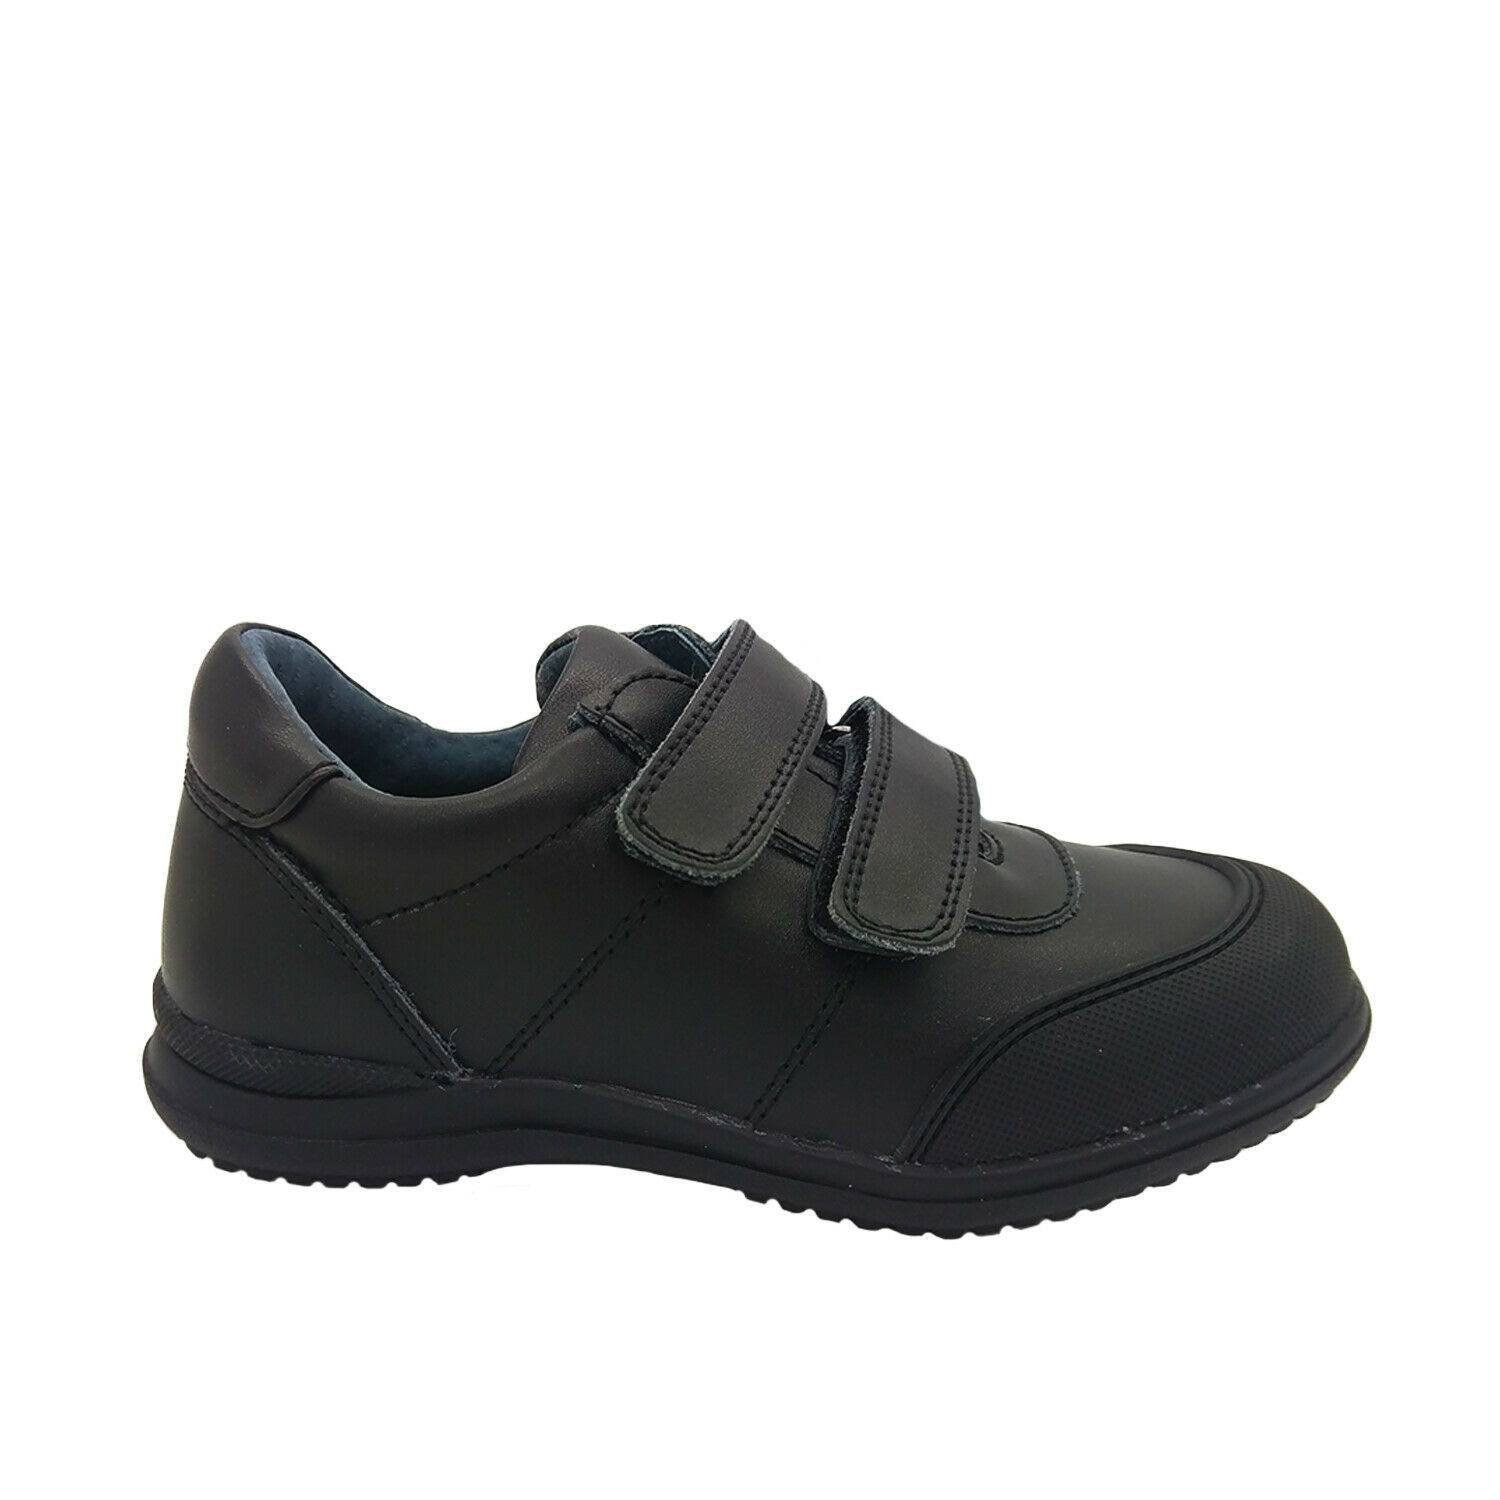 Boys Shoes Grosby Wiley Black Leather Hook and Loop School Shoe NEW ...